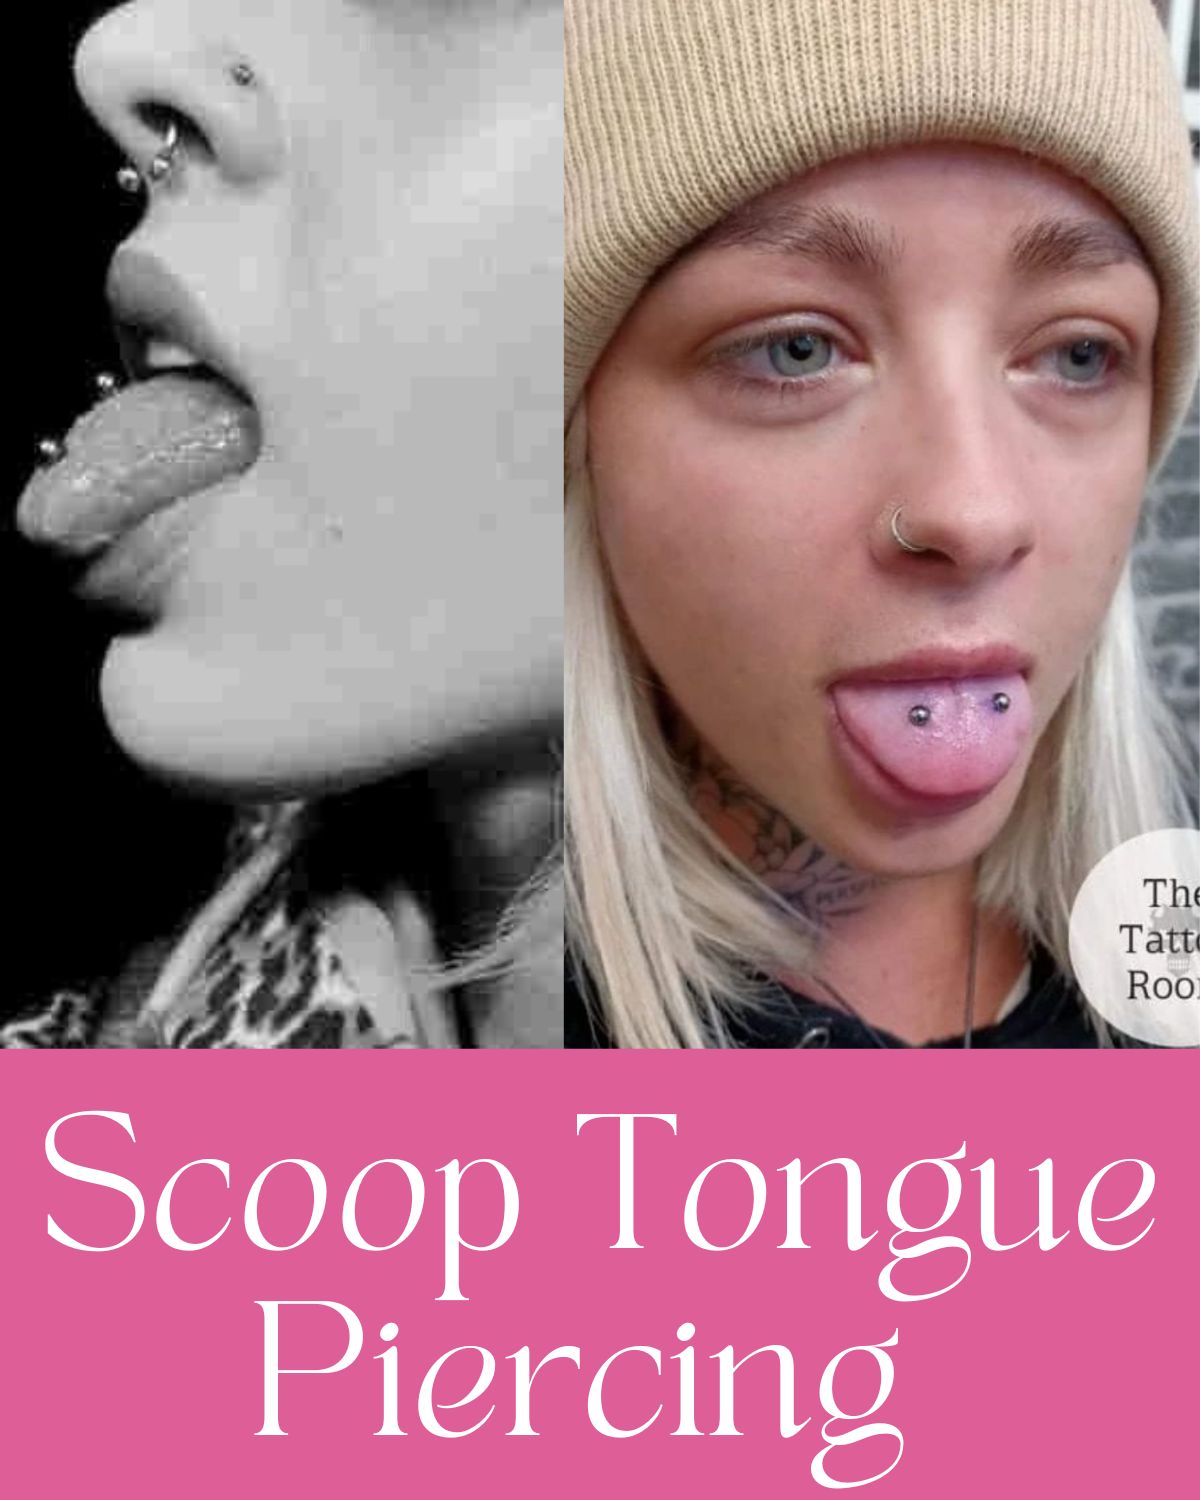 Two Scoop Tongue Piercing Ideas for girls